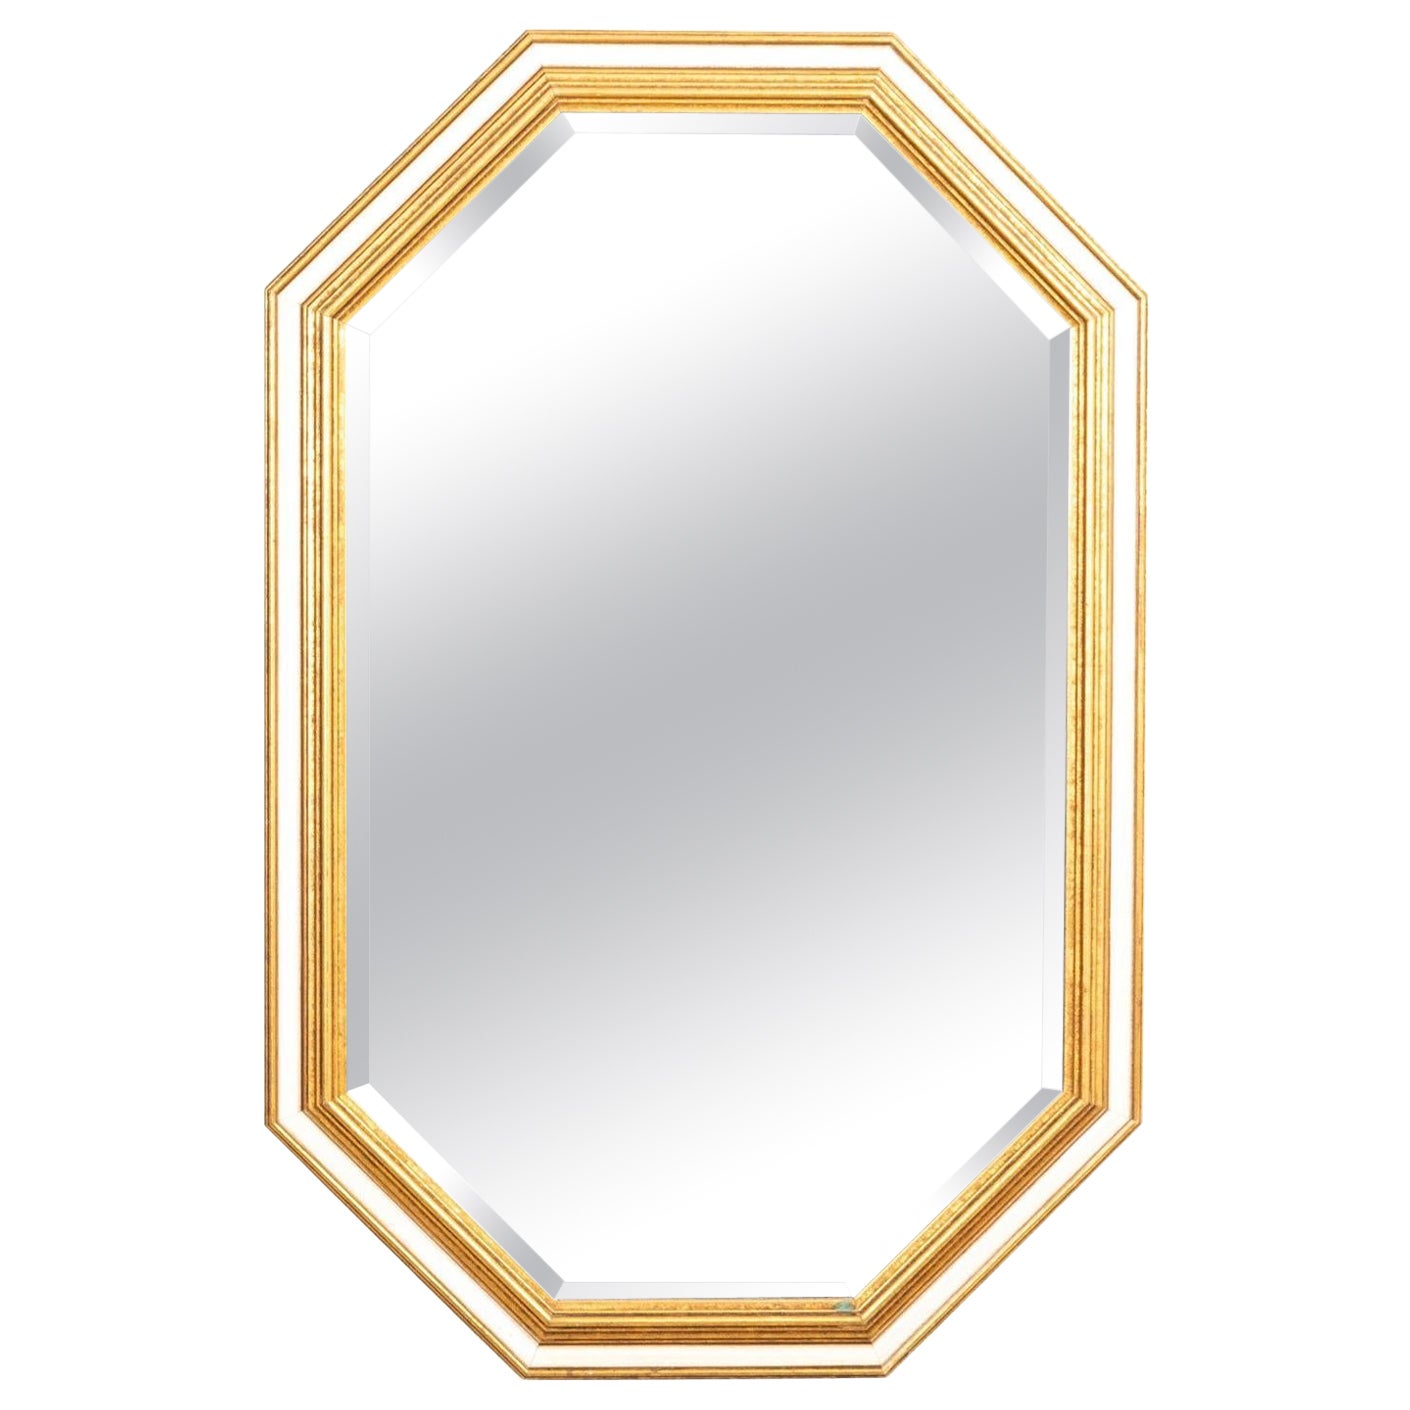 Italian Painted and Gilt Mirror For Sale